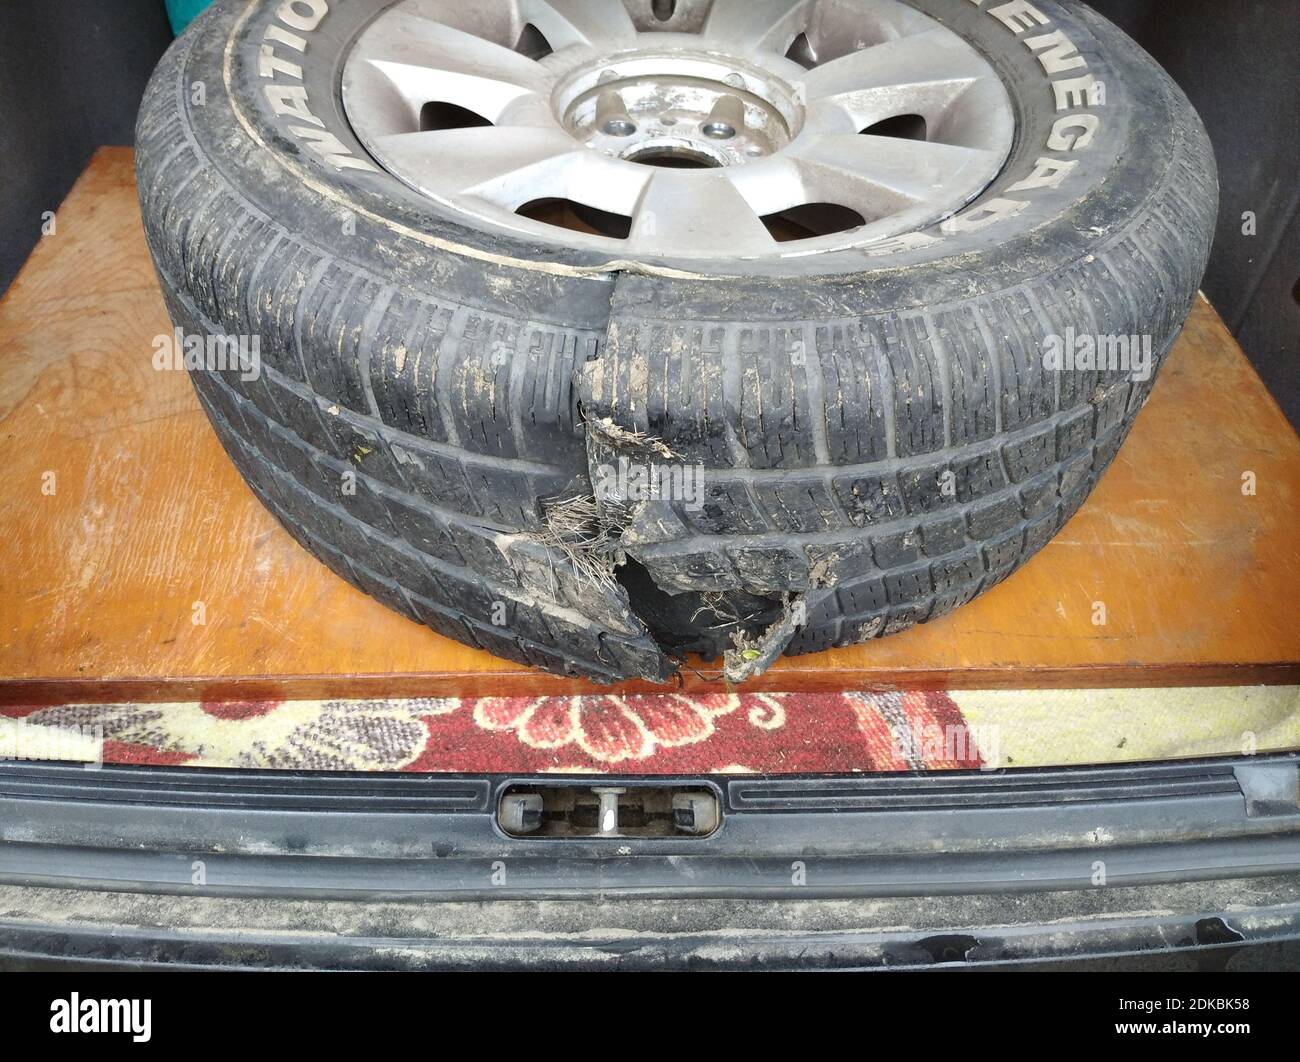 The blown-up damaged tire of the car's wheel lies in the trunk Stock Photo